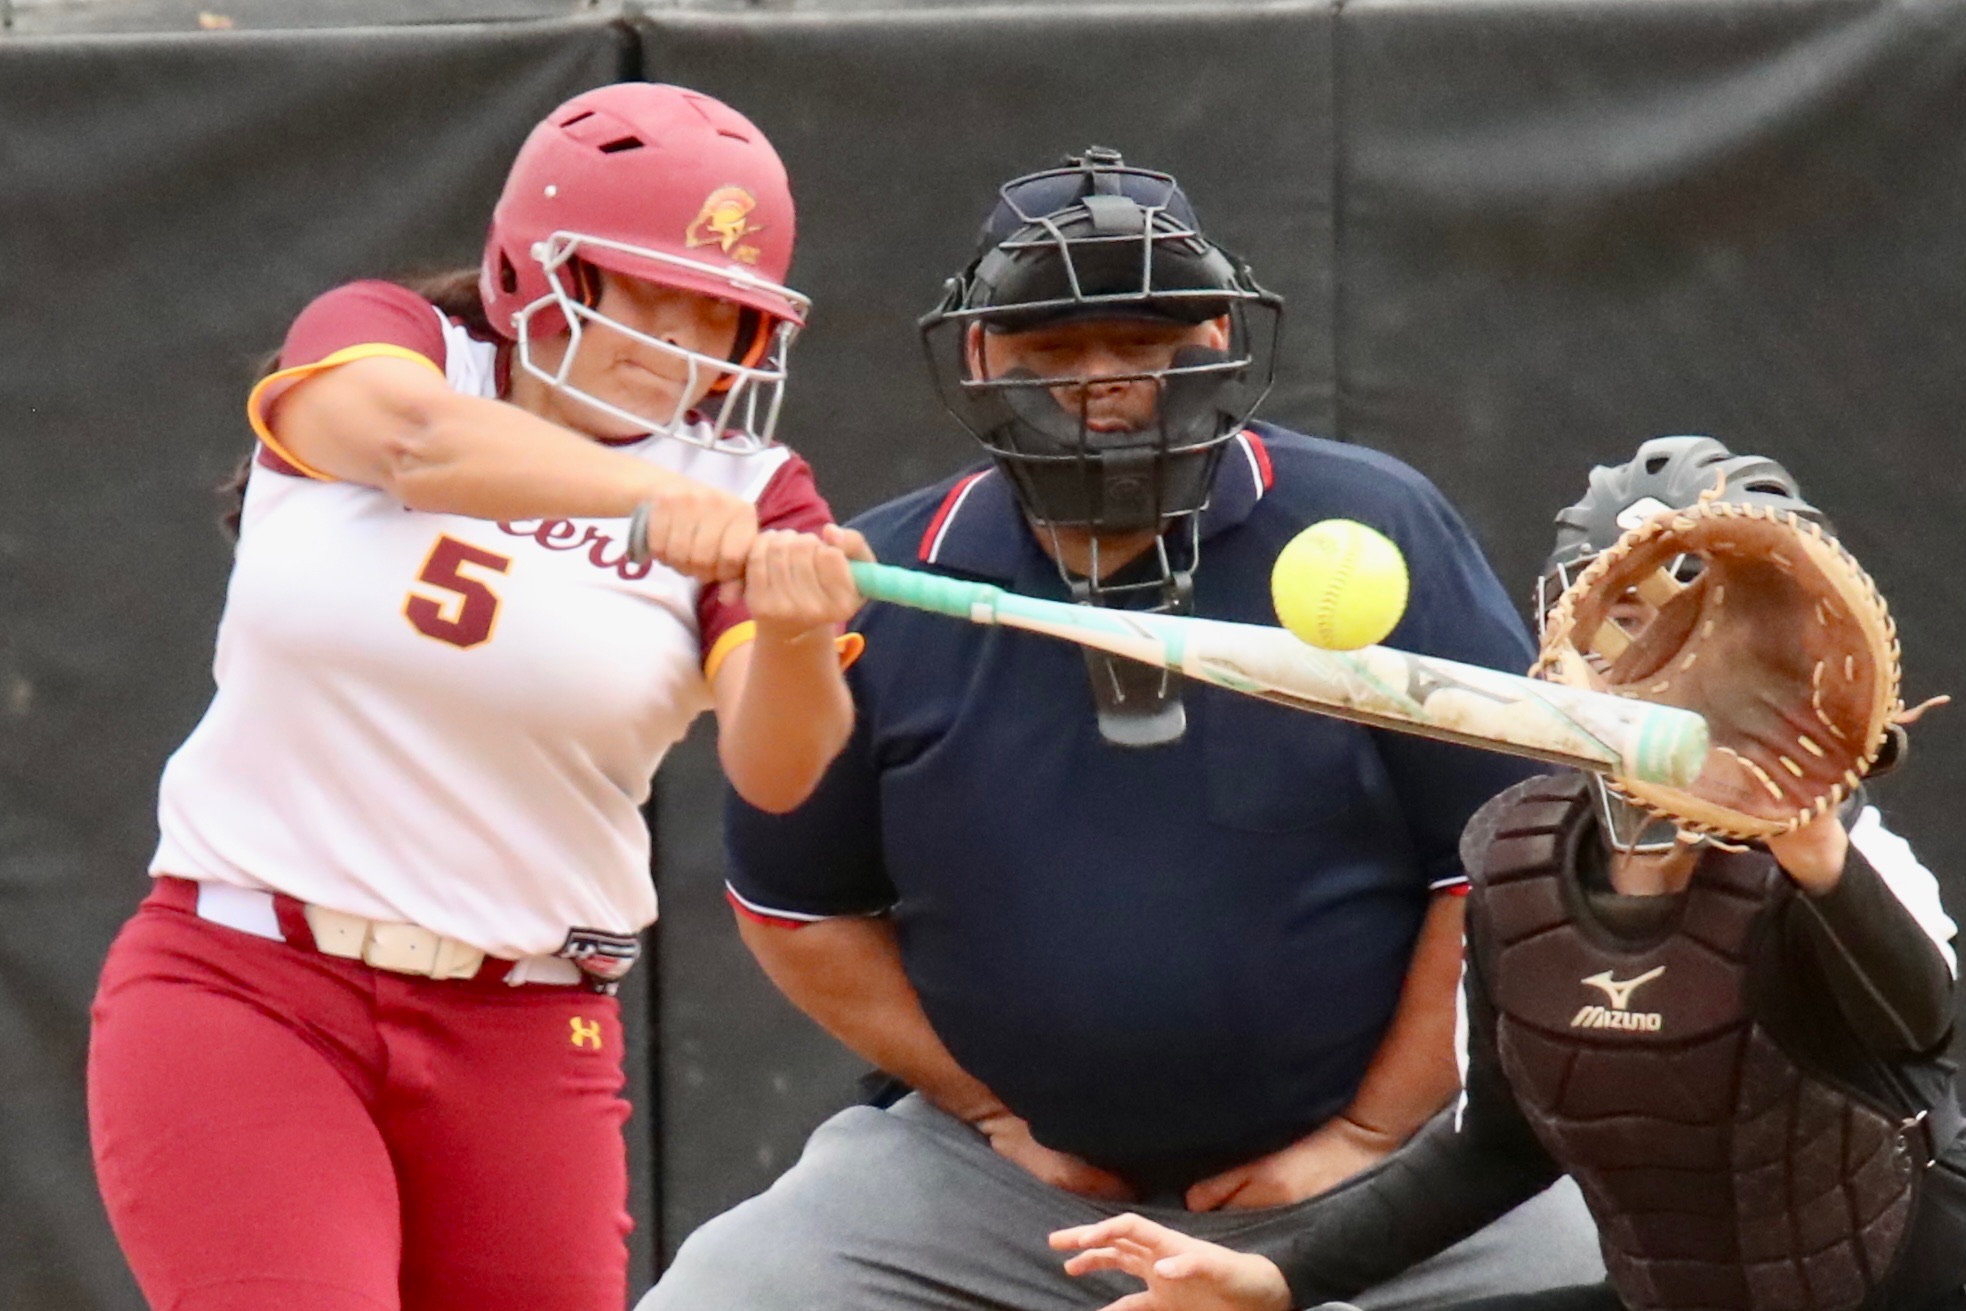 Marcella Ordonez breaks up Palomar pitcher India Caldwell's no-hit bid here in the seventh inning of game 1 of PCC softball's doubleheader on Saturday. (photo by Michael Watkins, Athletics).